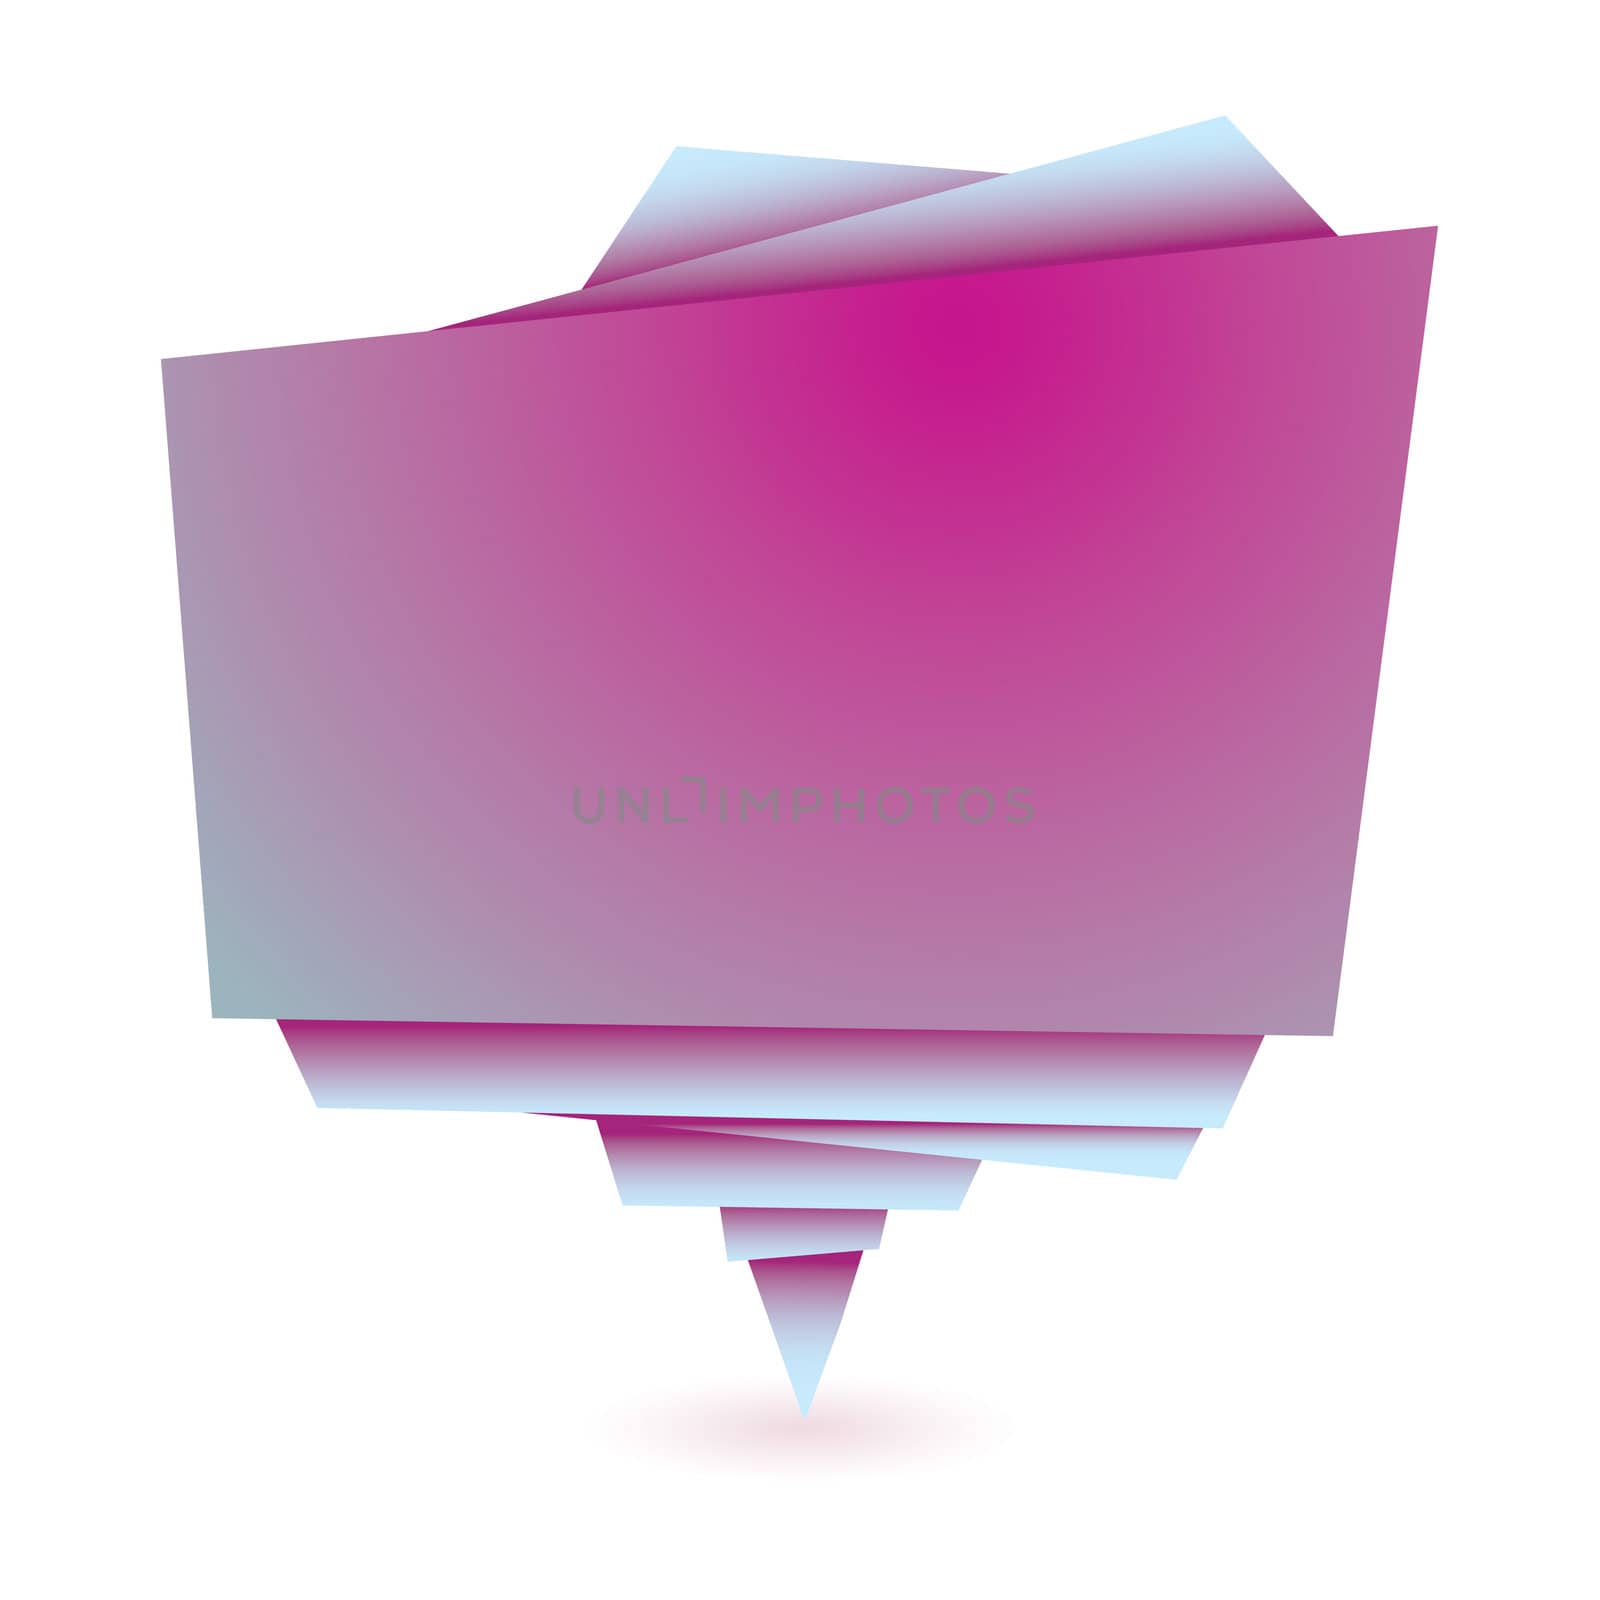 Pink paper origami element with copyspace and drop shadow